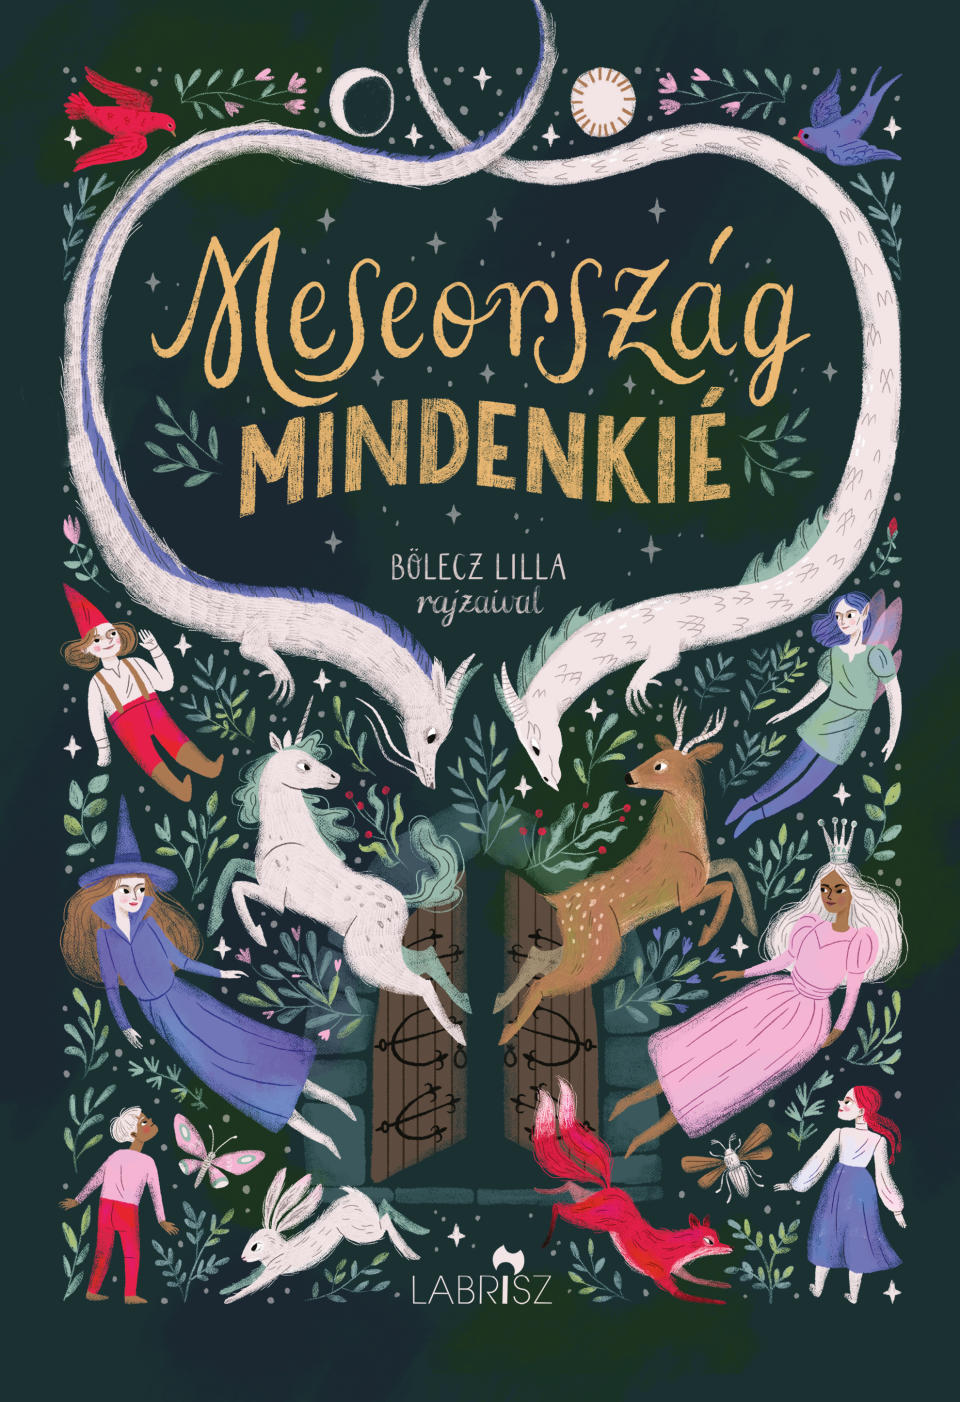 <span class="copyright">Illustration by Lilla Bölecz for 'Meseorszag mindenkie' or 'A Fairy Tale for Everyone'</span>